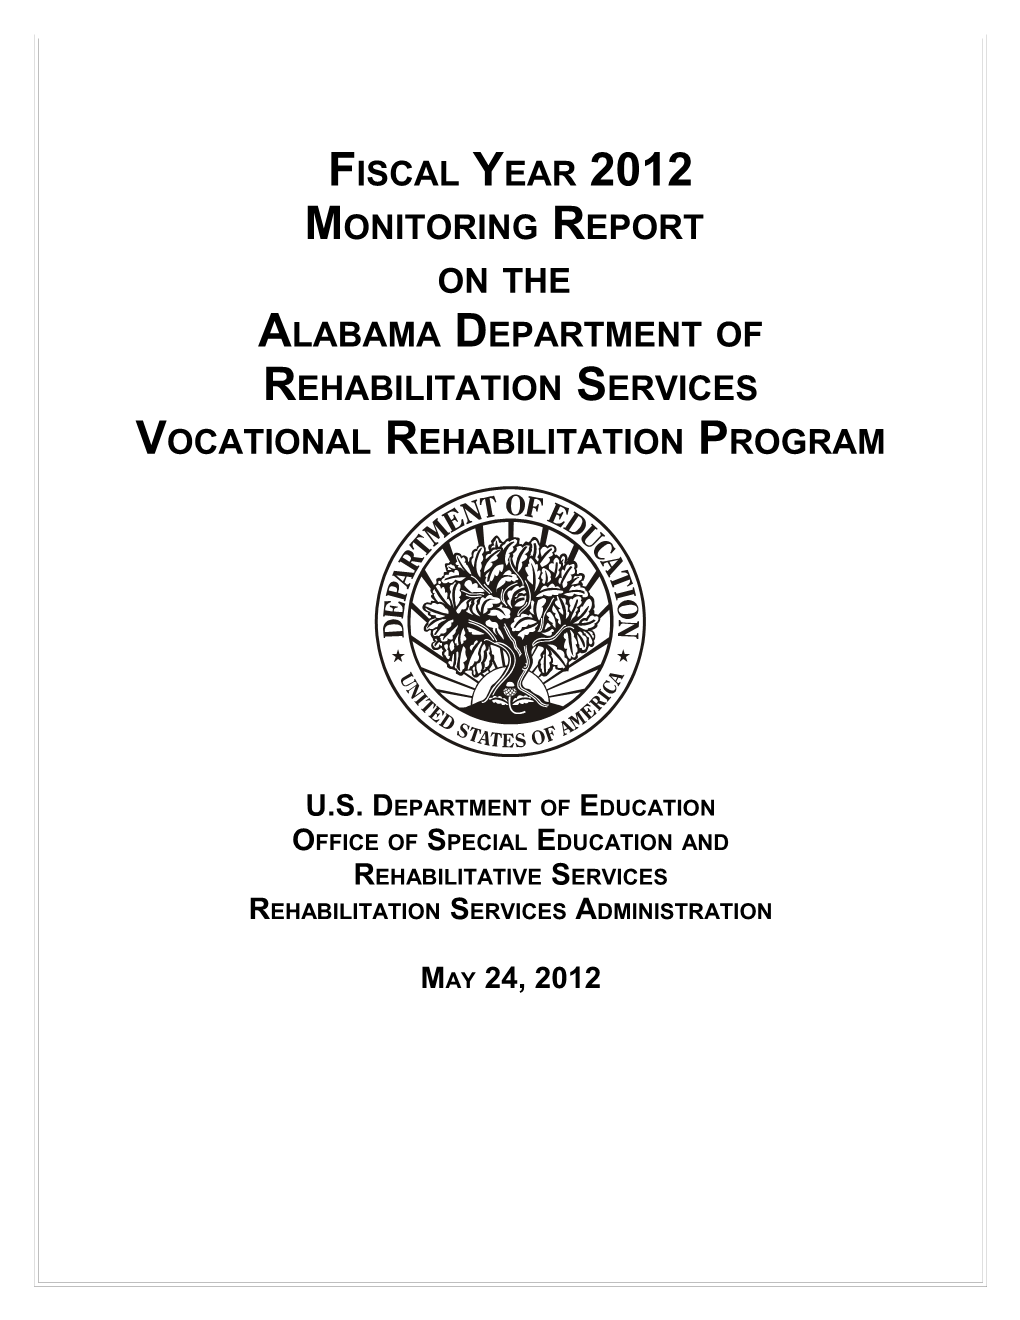 Fiscal Year 2012 Monitoring Report on the Alabama Department of Rehabilitation Services